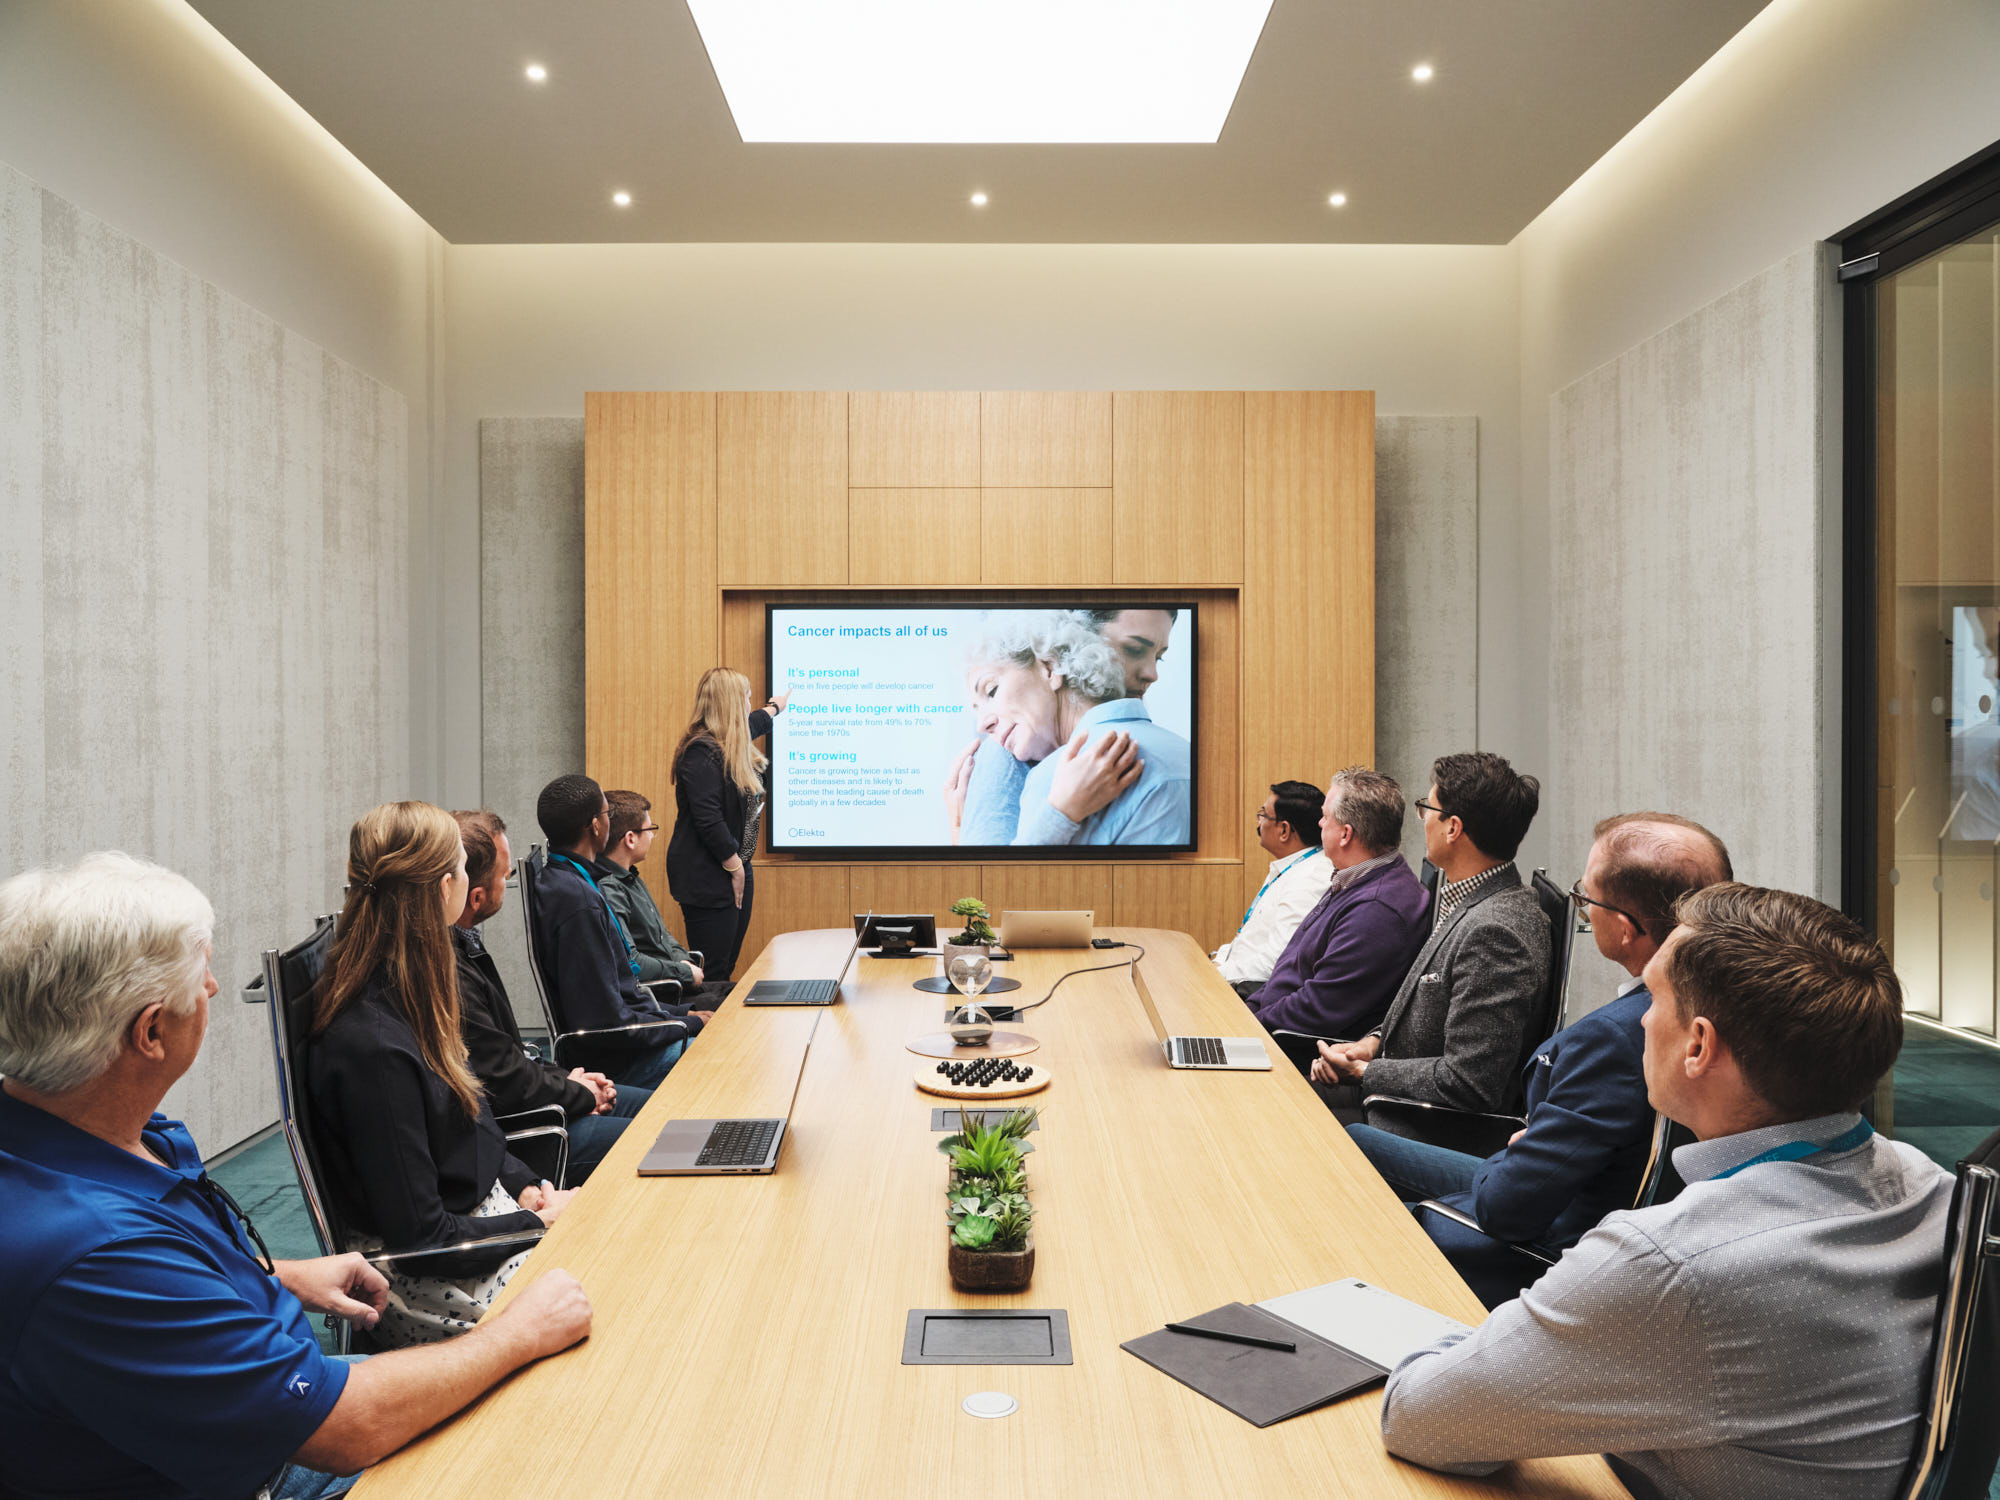 employees watching presentation in conference room